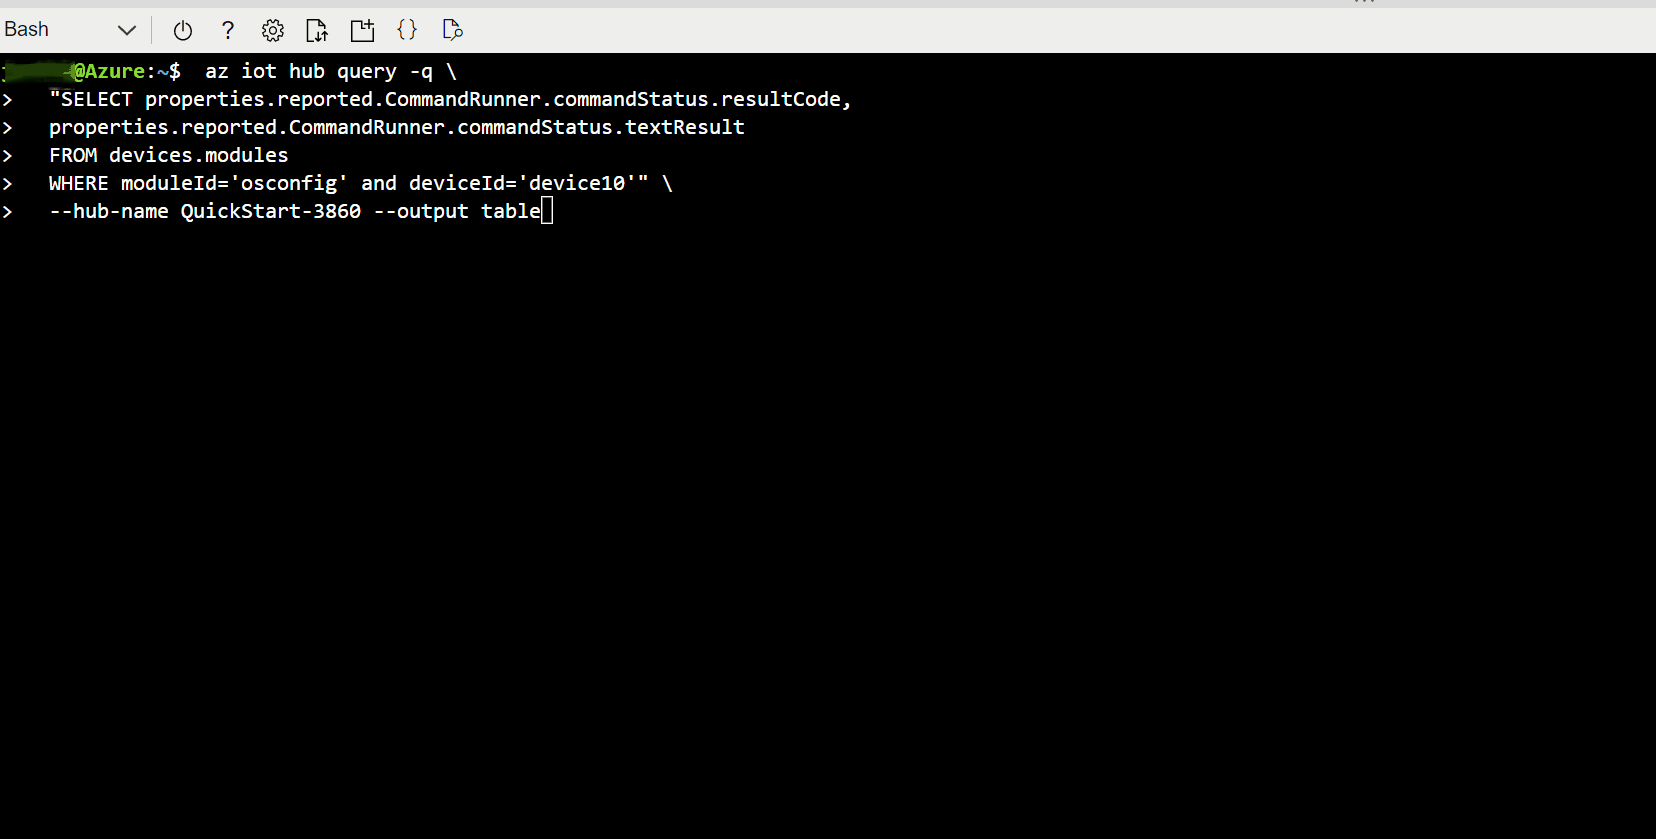 Screen capture showing how to get the result of any command like ping for a single device using bash